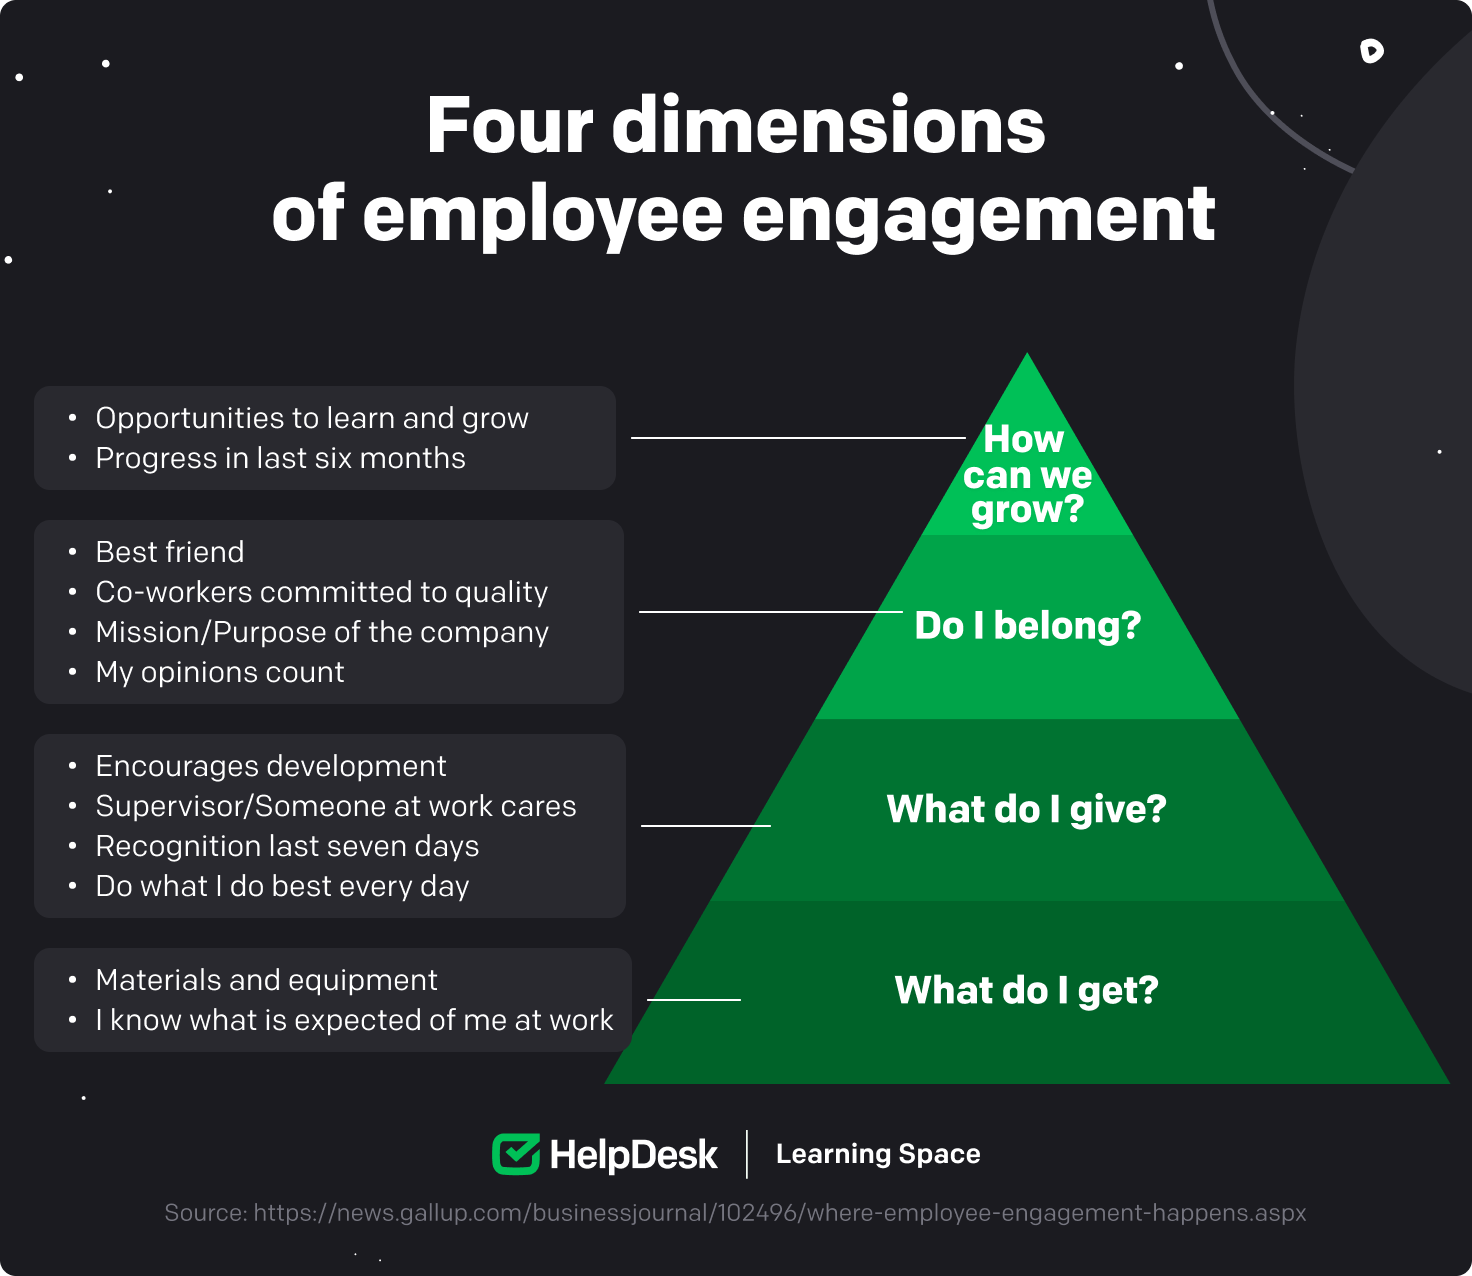 Four dimensions of employee engagement provided by Gallup.